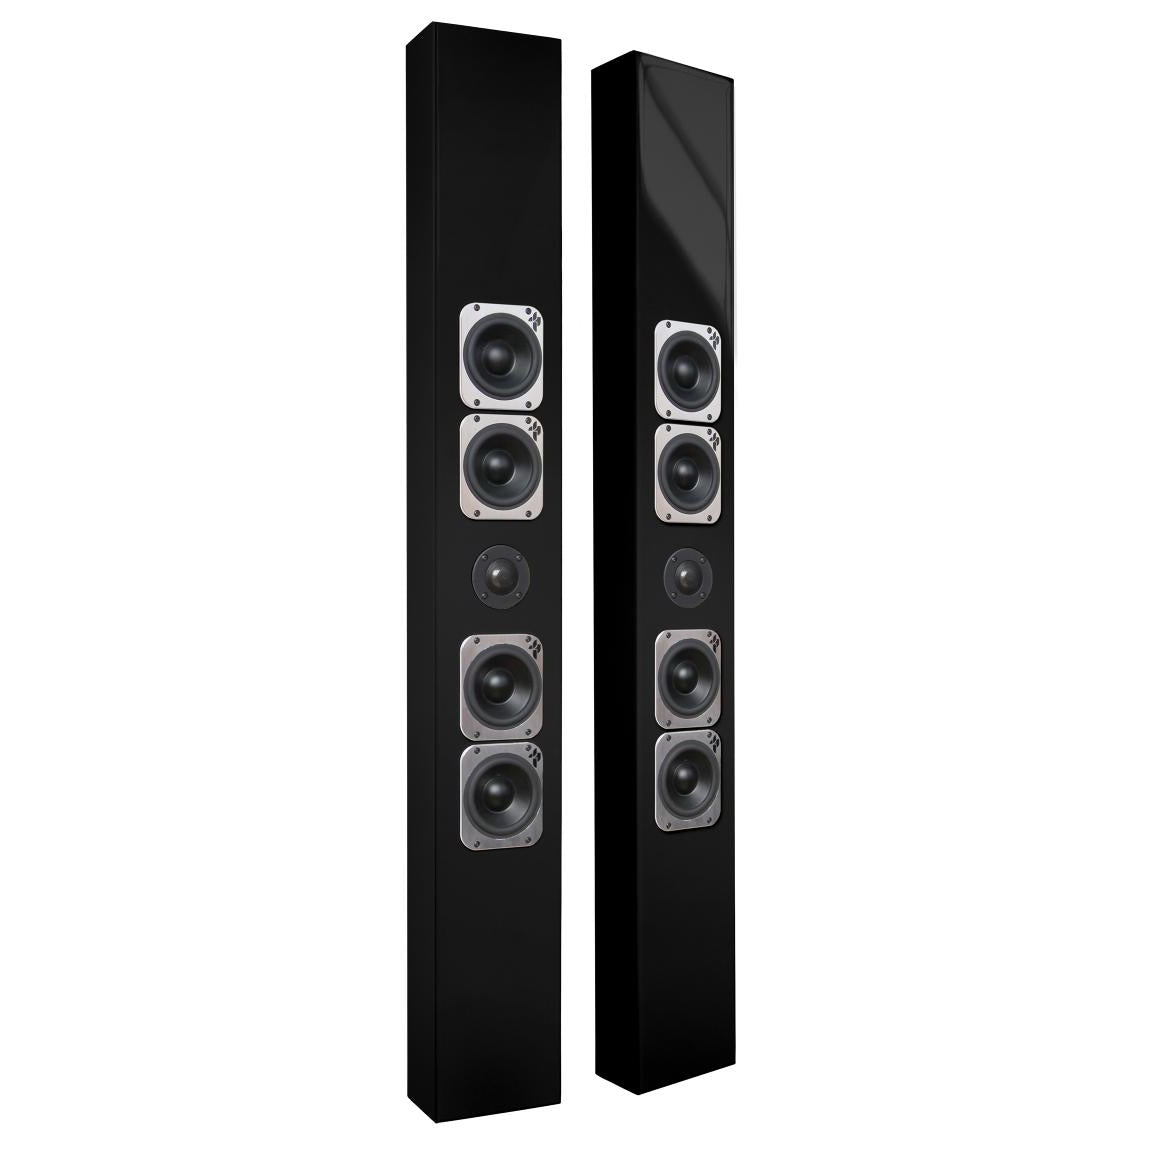 Totem - Tribe V - On-Wall Speaker at Audio Influence